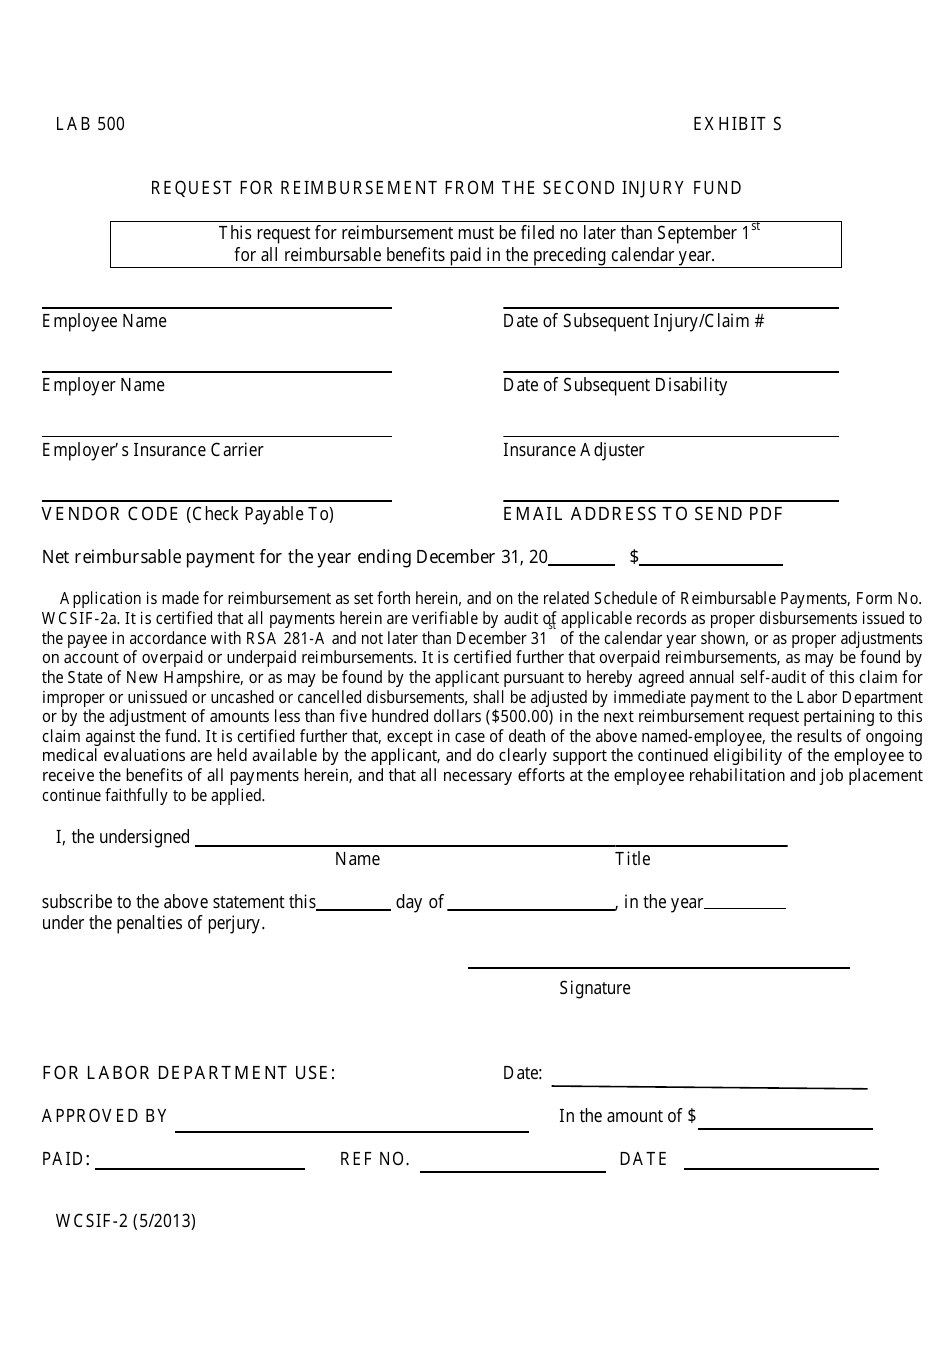 Form WCSIF-2 Exhibit S Request for Reimbursement From the Second Injury Fund - New Hampshire, Page 1